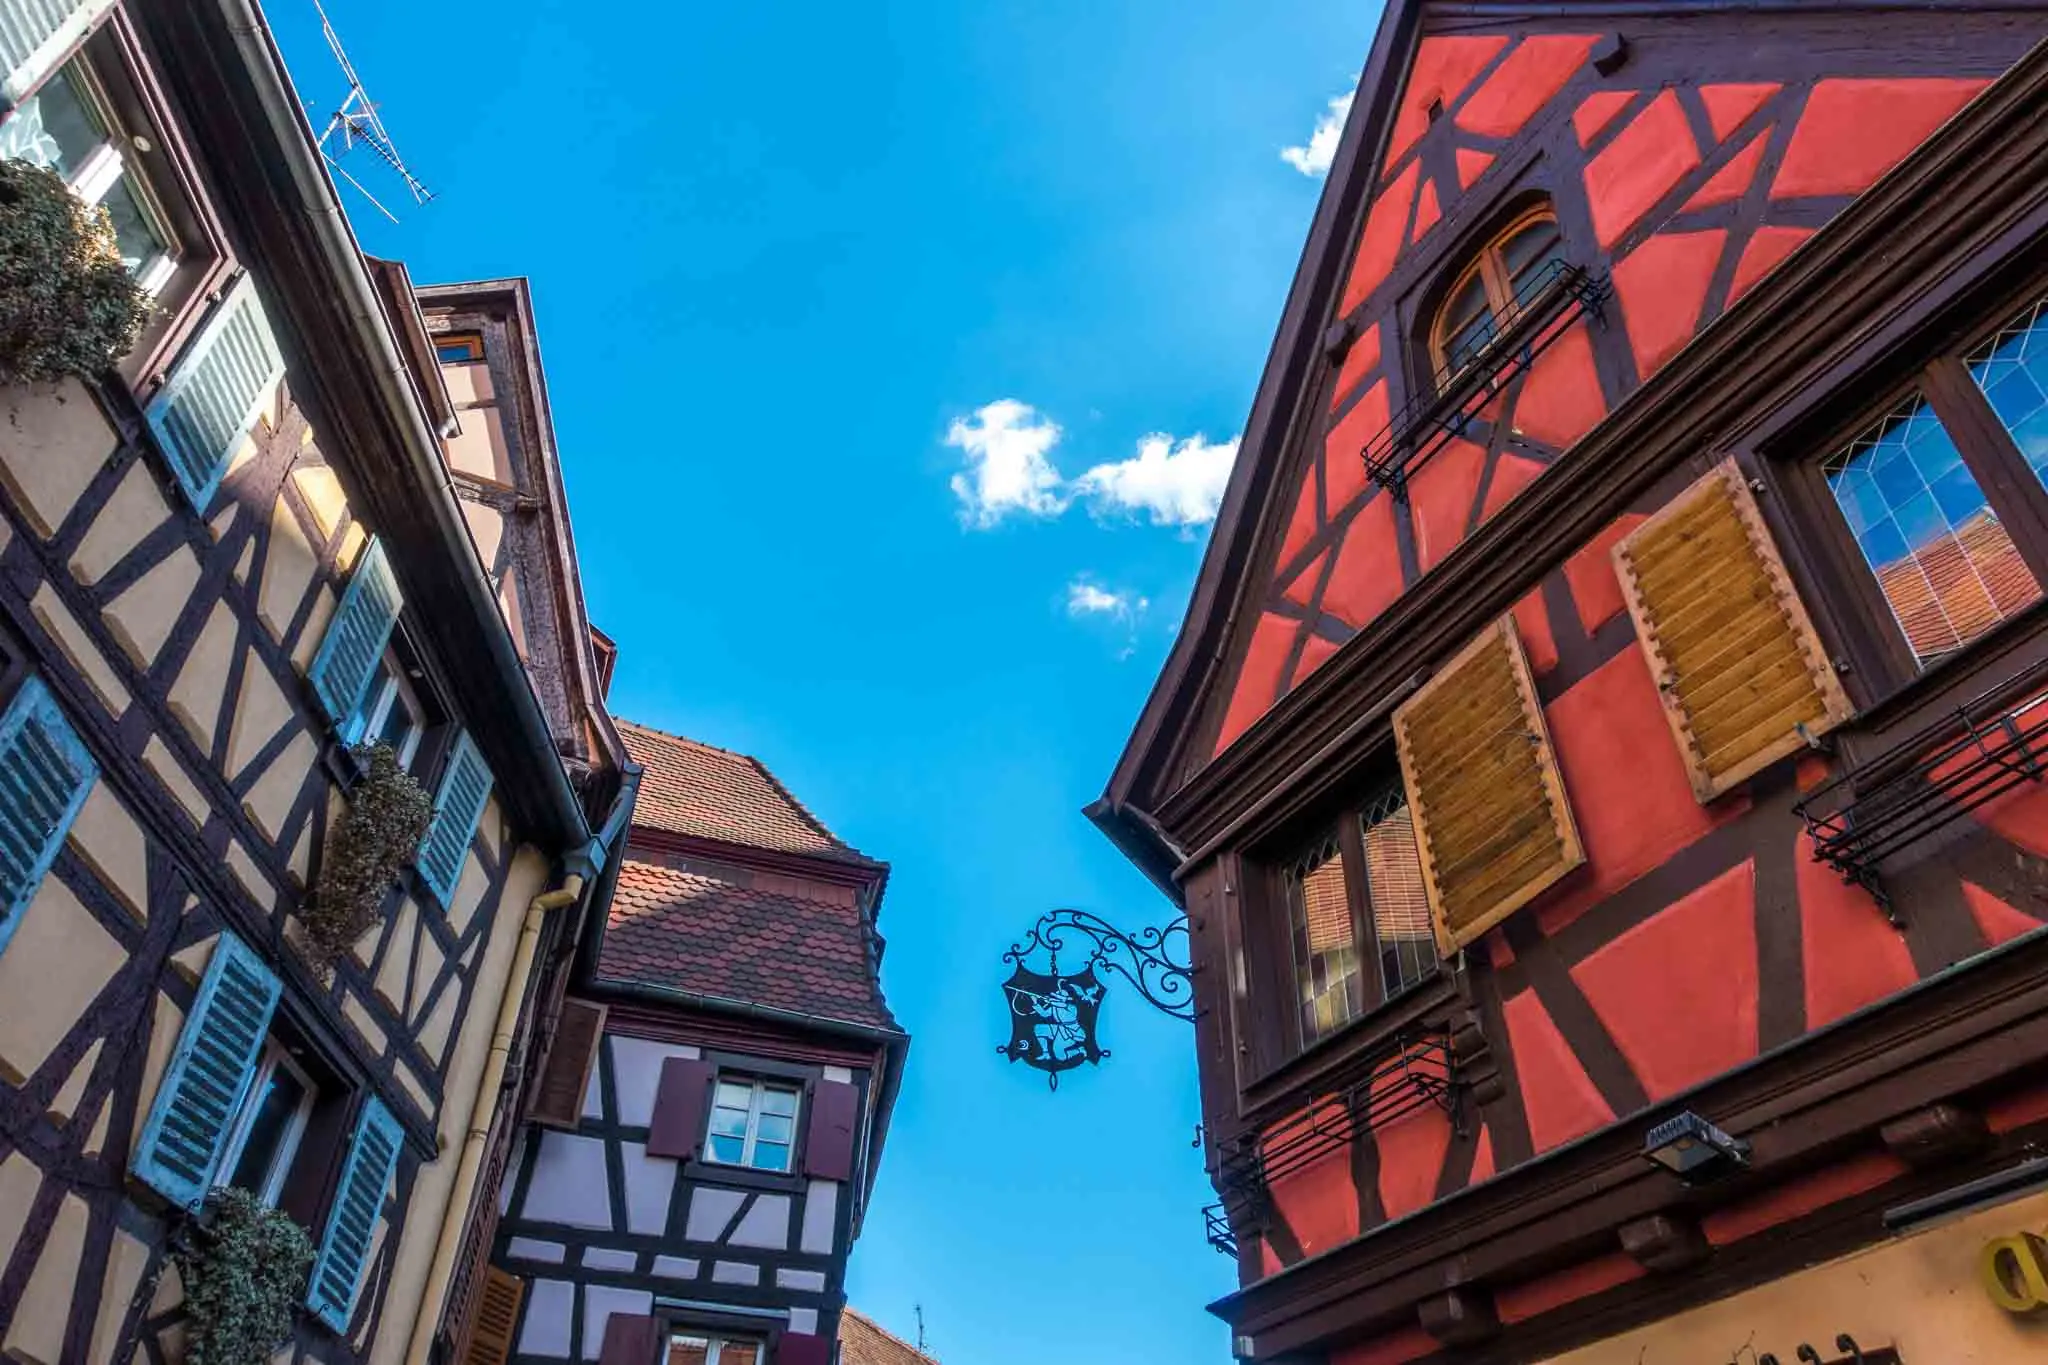 Half-timbered buildings with an iron sign.